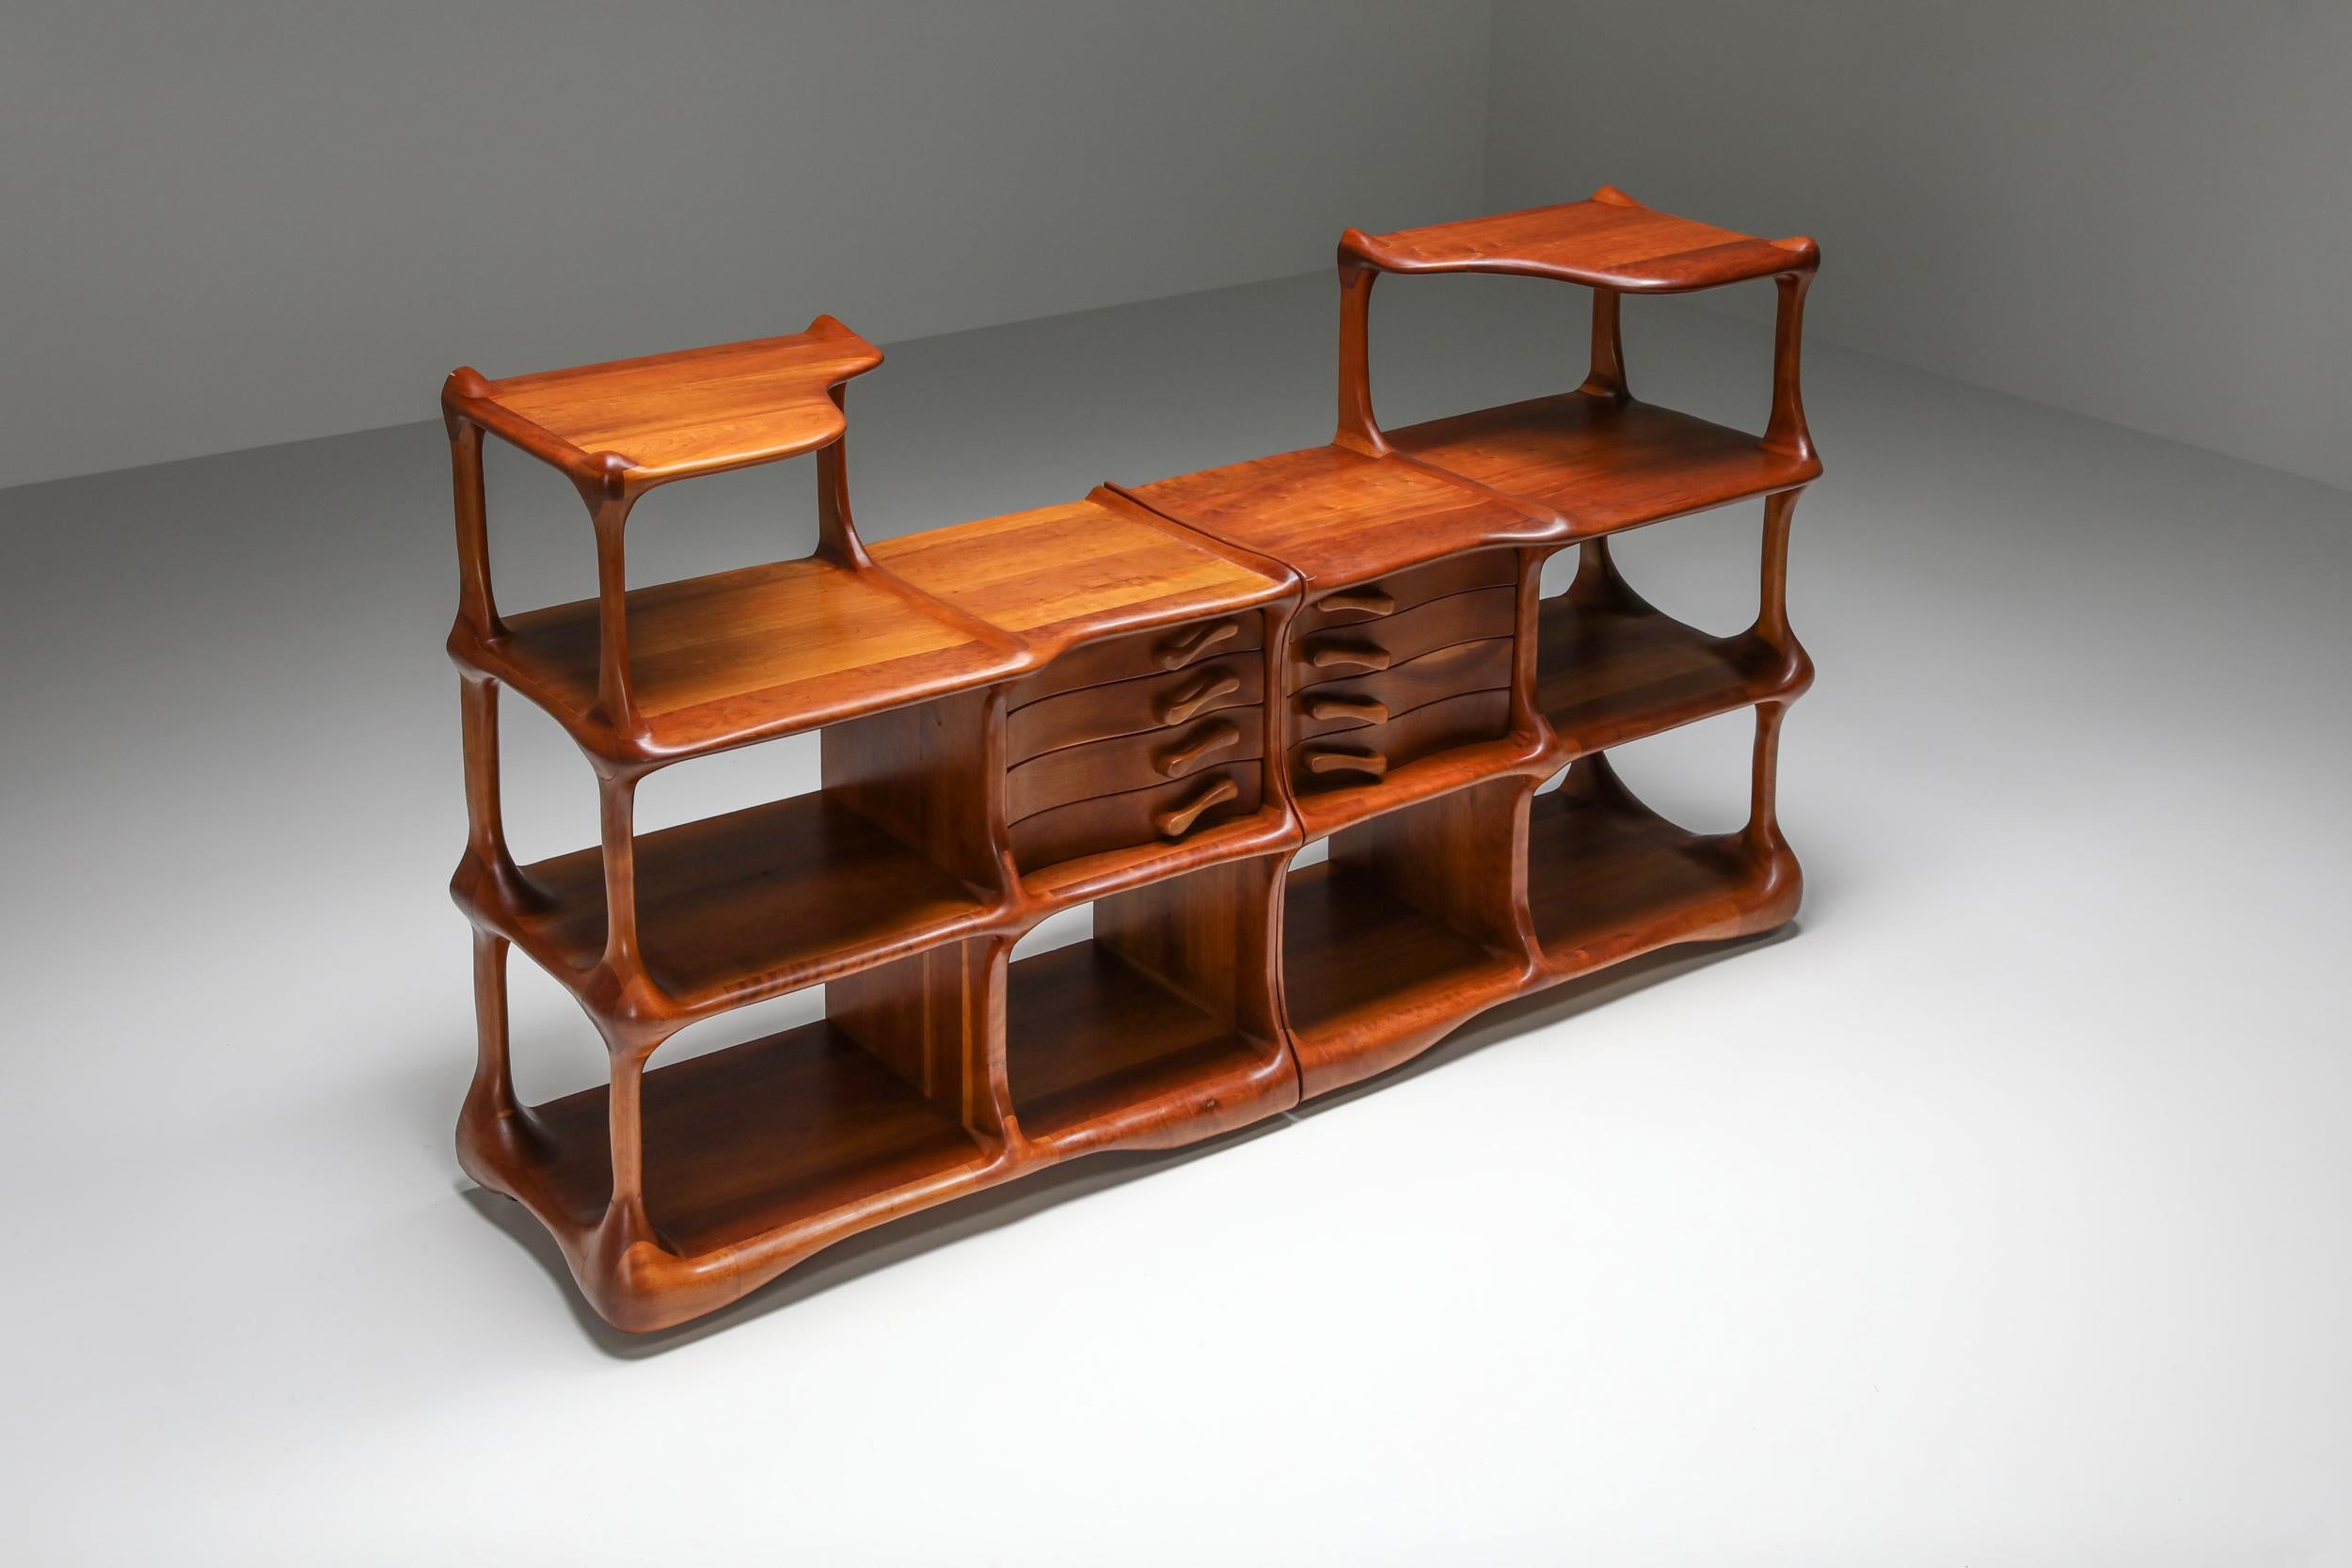 American Craftsman Wendell Castle Inspired Open Storage by Charles Fisher and Howard Osinski USA